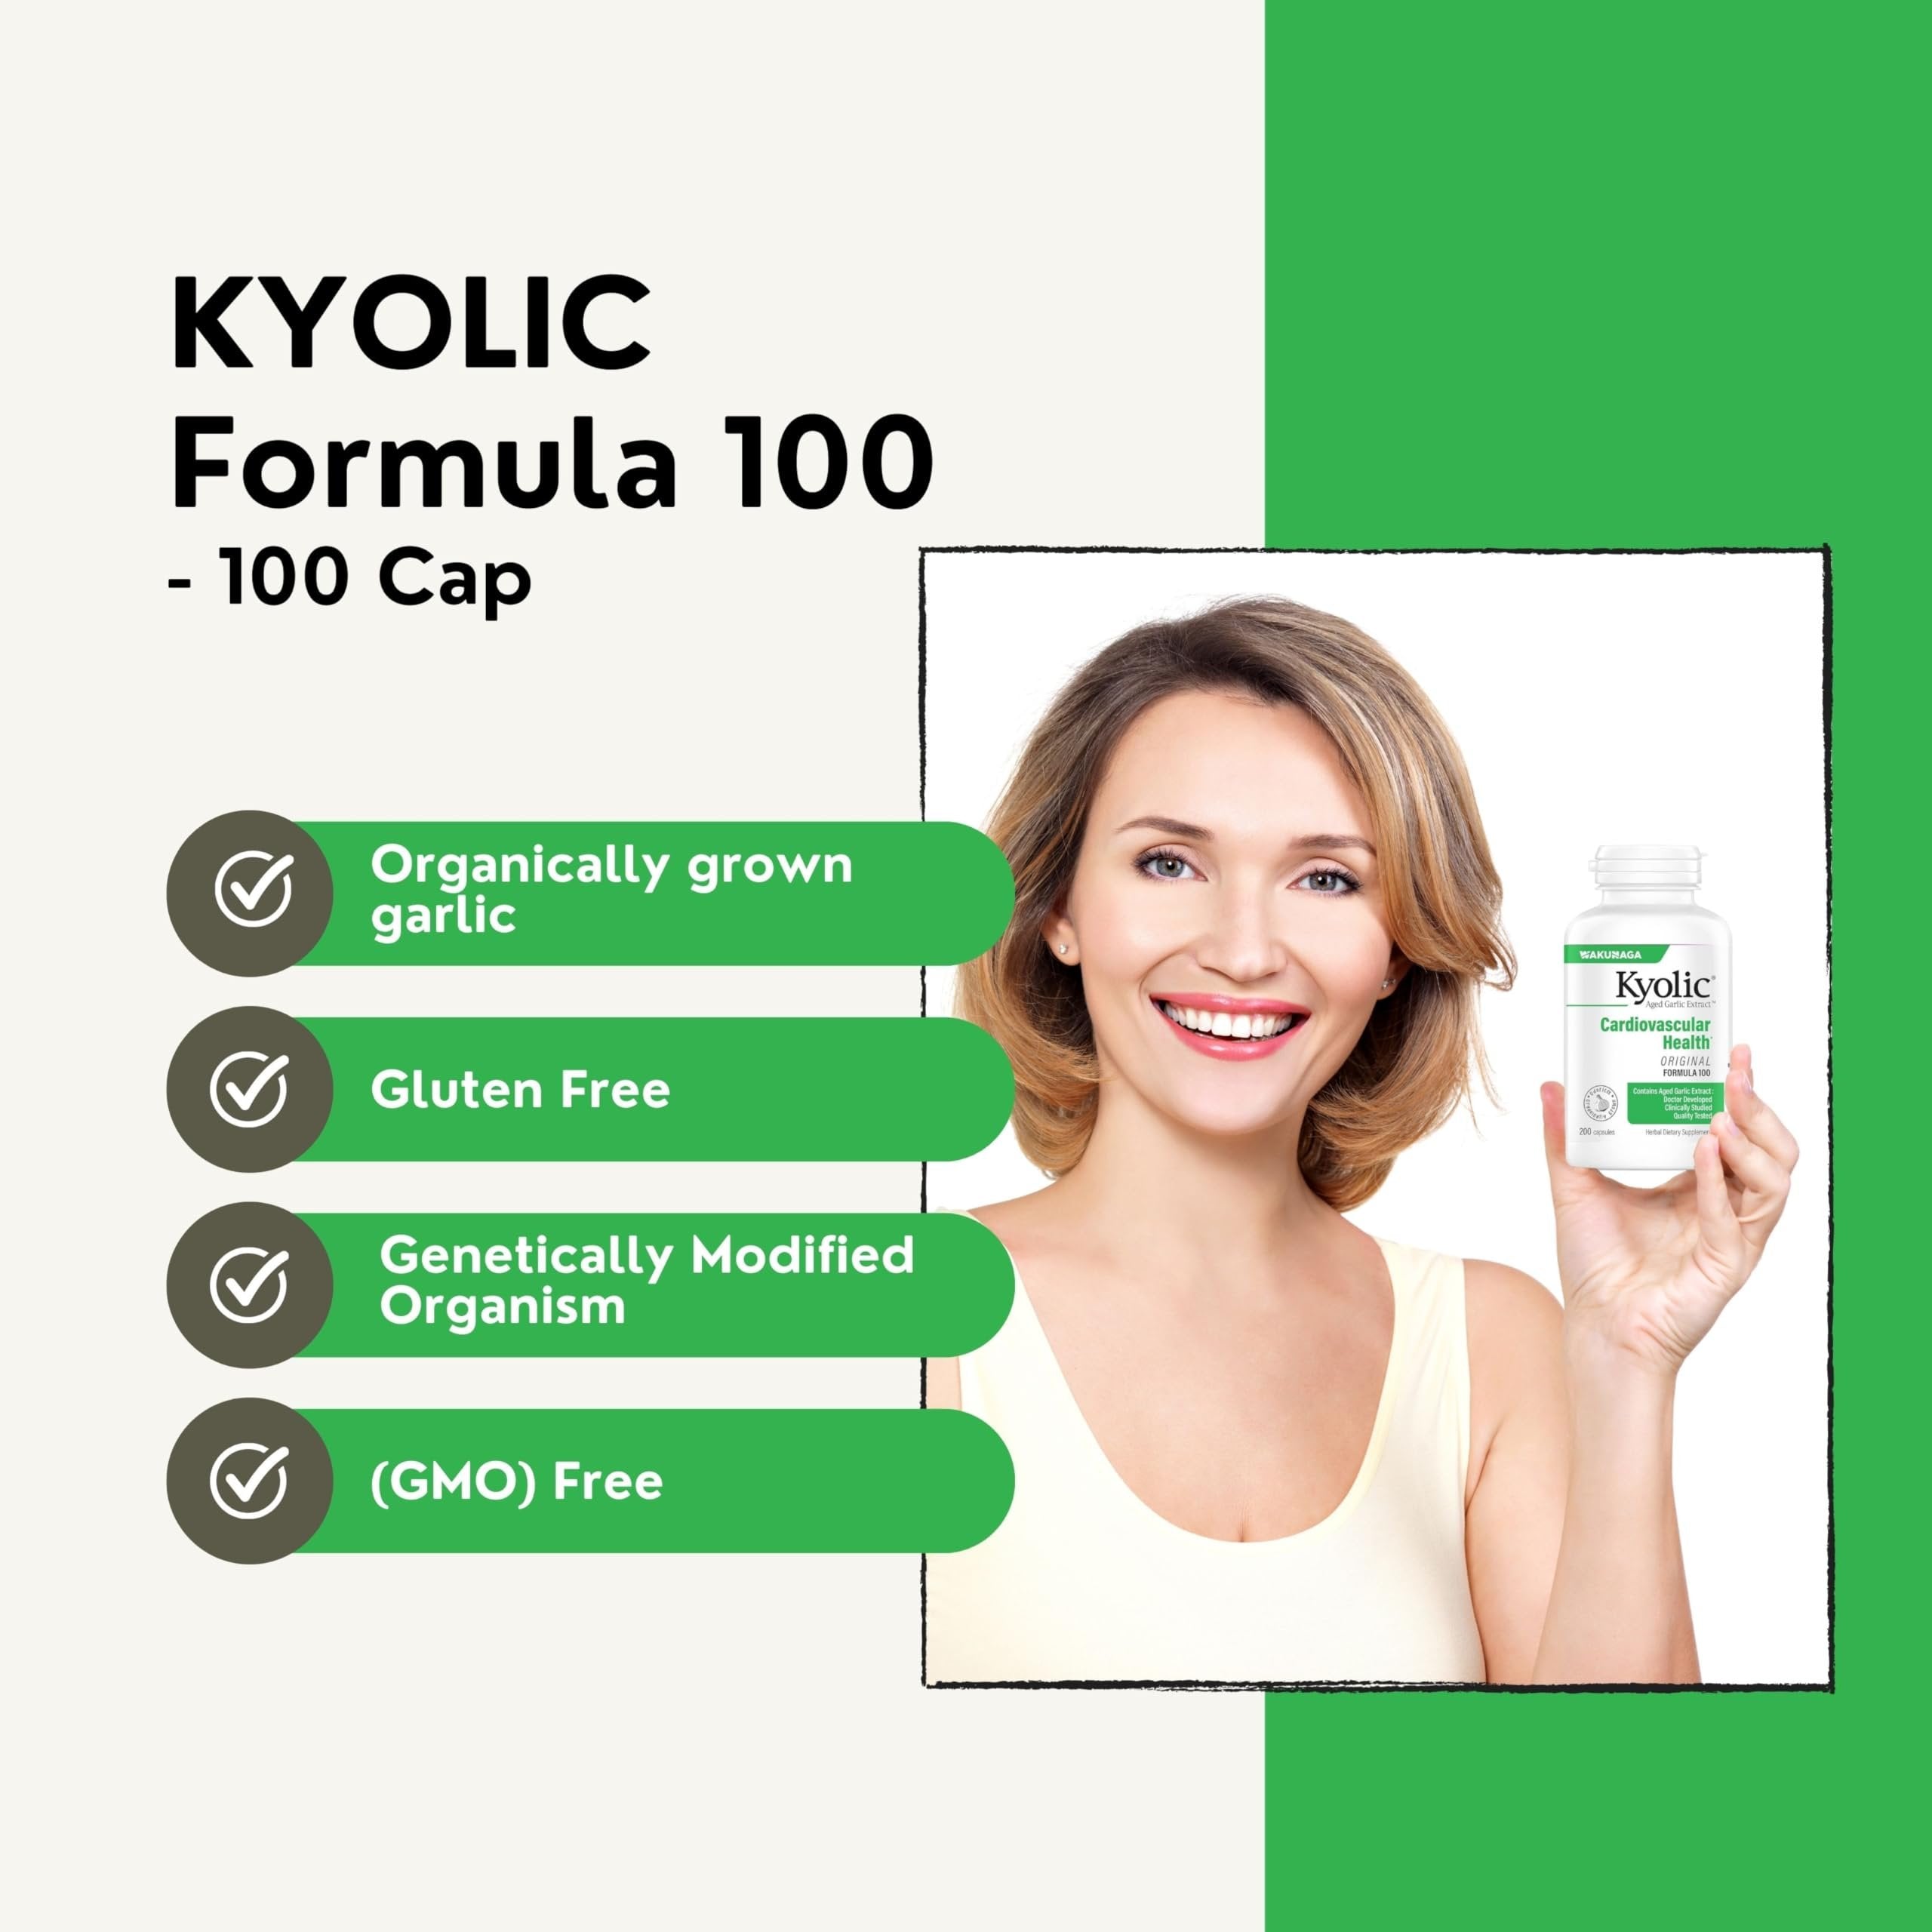 Worldwide Nutrition Bundle, 2 Items: Kyolic Aged Garlic Extract Formula 100, Original Cardiovascular, 100 Capsules and Multi-Purpose Key Chain (Packaging May Vary)